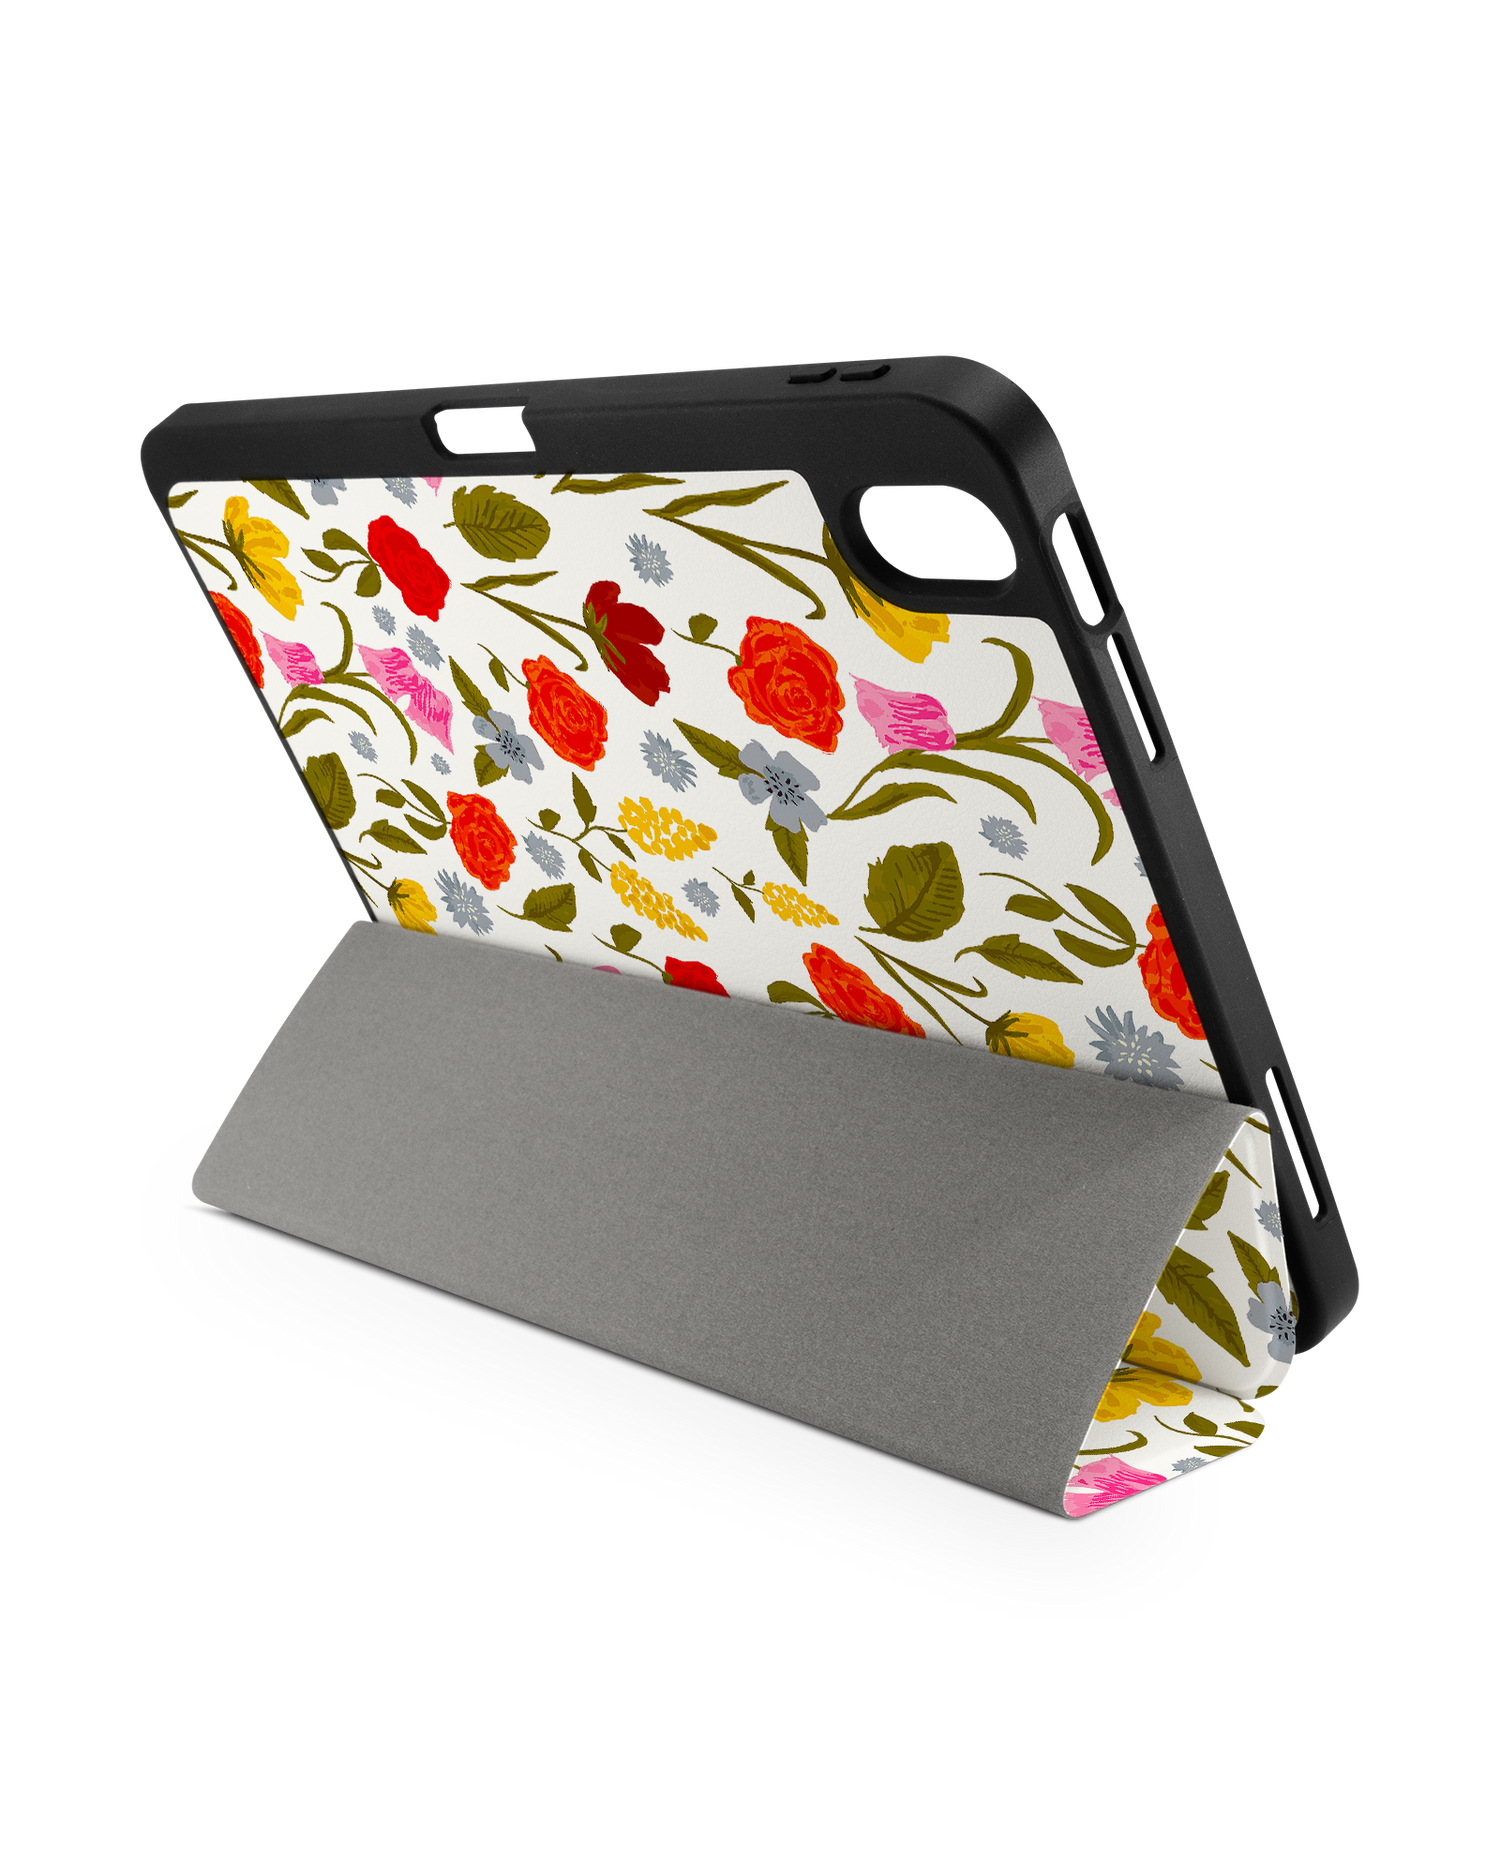 Botanical Beauties iPad Case with Pencil Holder for Apple iPad (10th Generation): Set up in landscape format (back view)